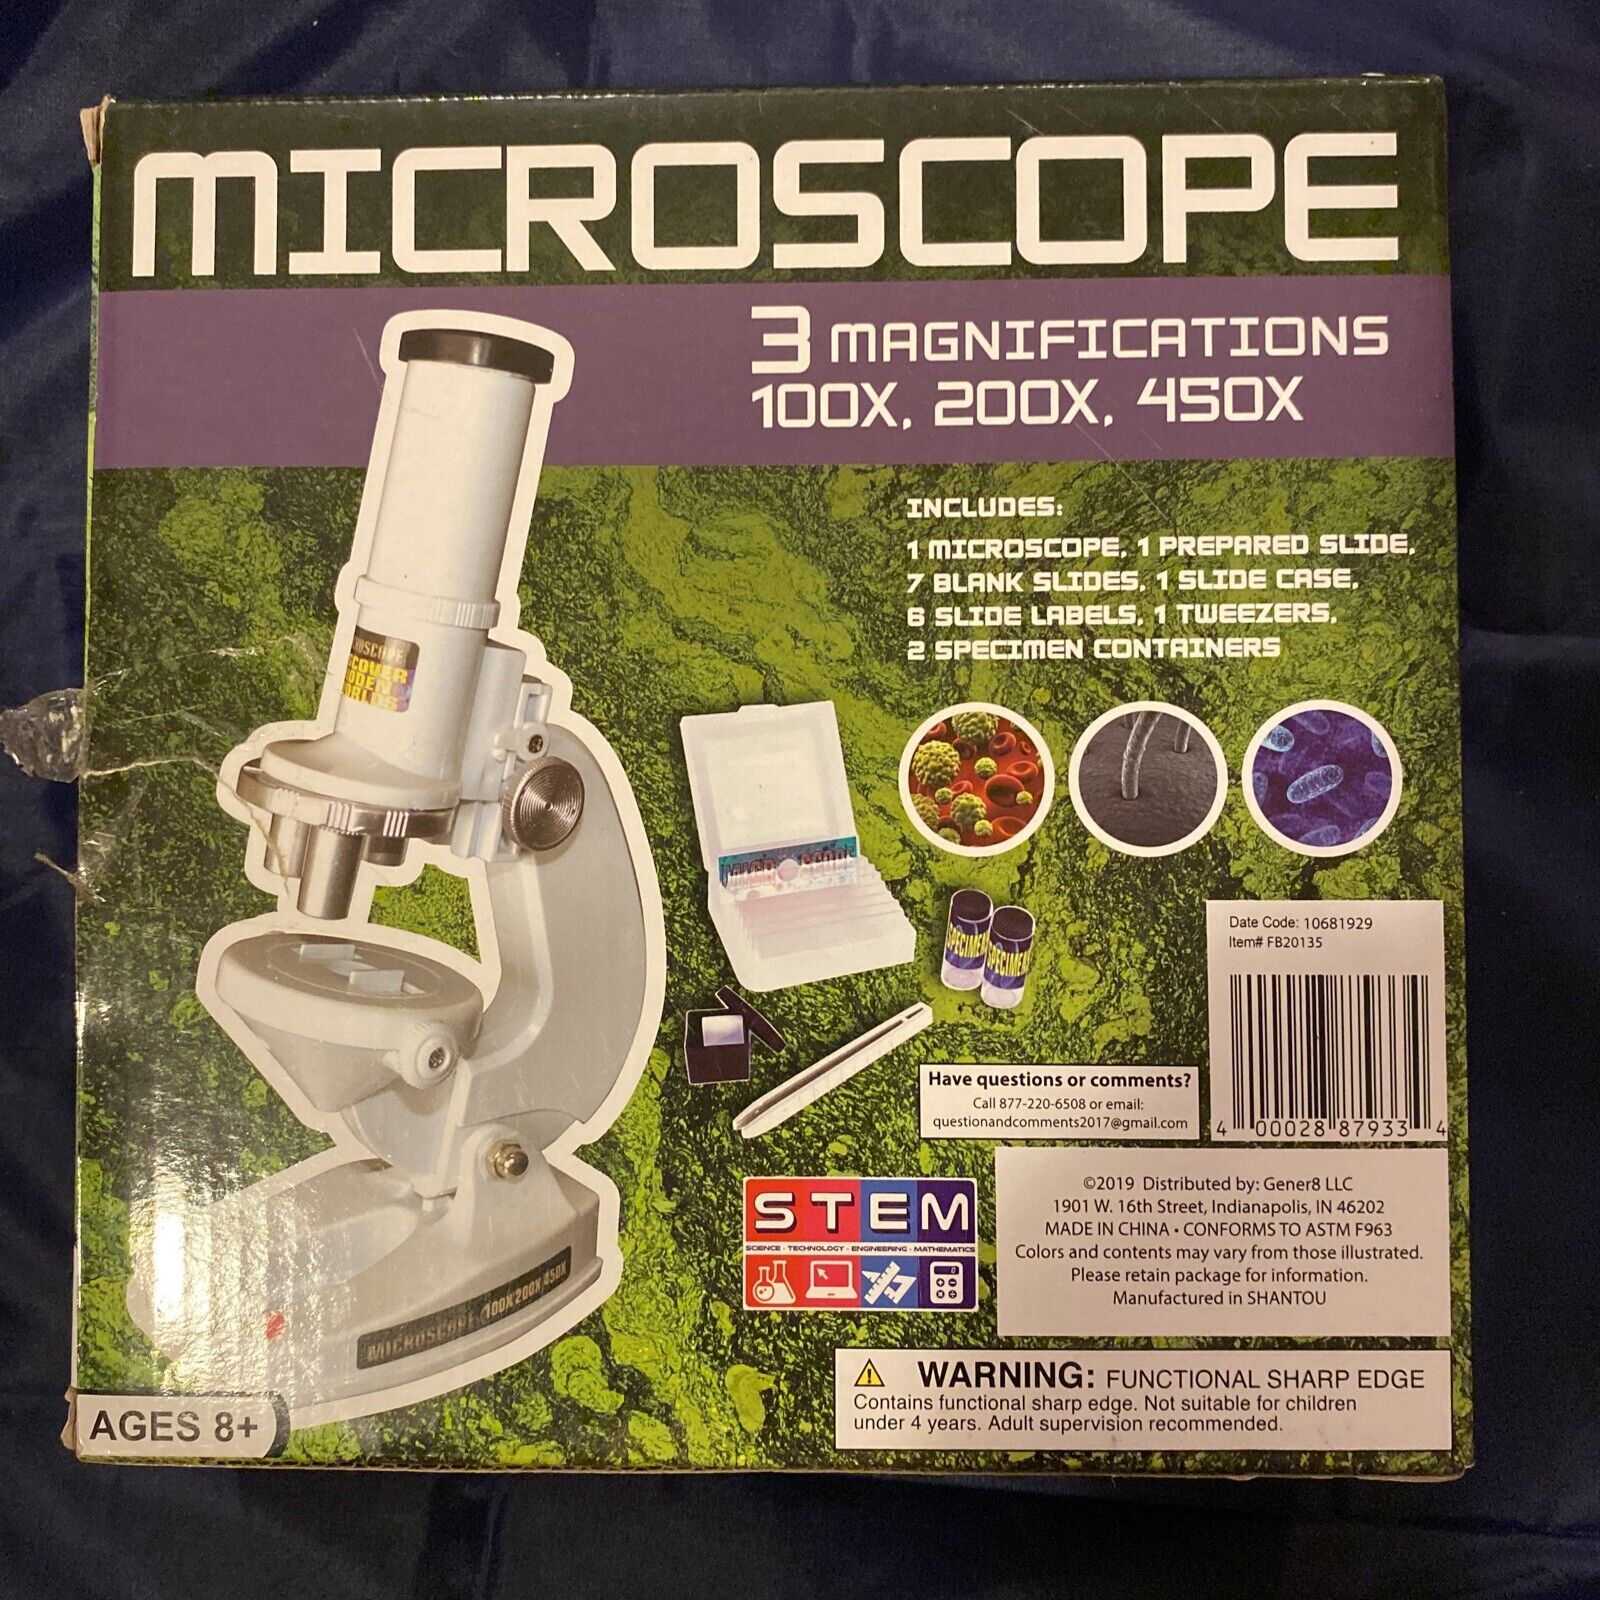 New STEM MICROSCOPE 3 MAGNIFICATIONS AGES 8+